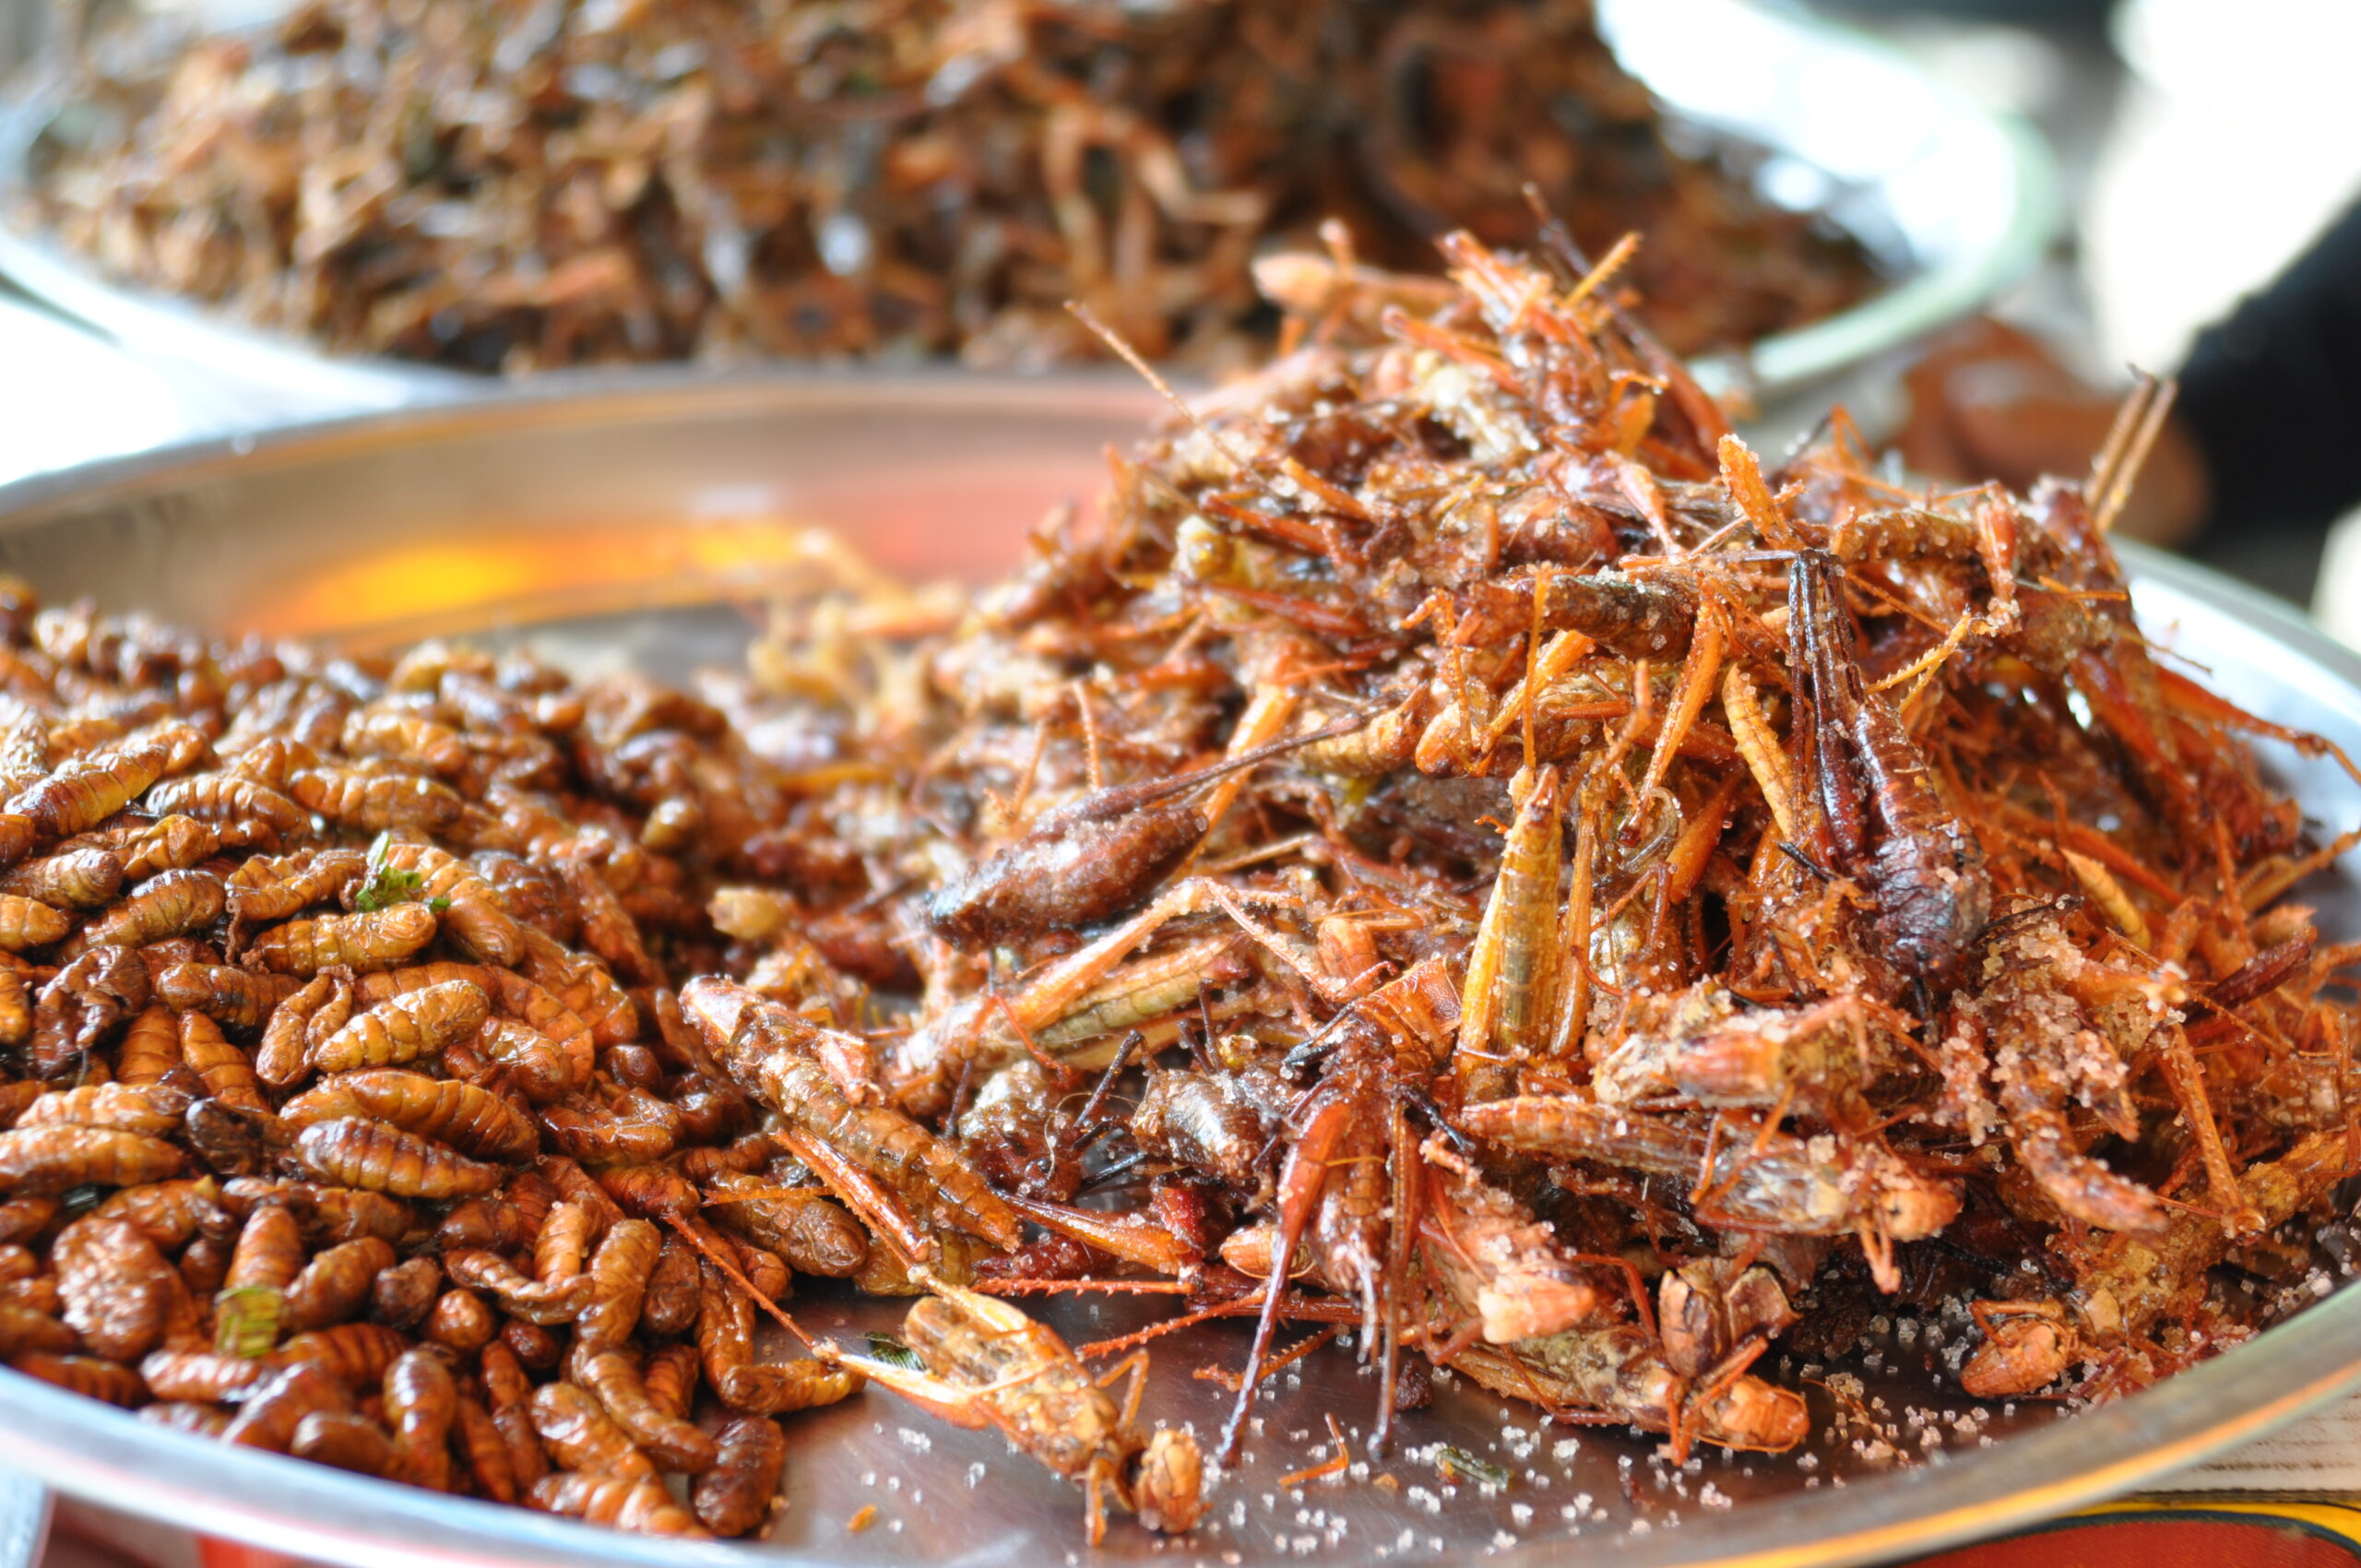 The Rise Of The Incredible Edible Insect